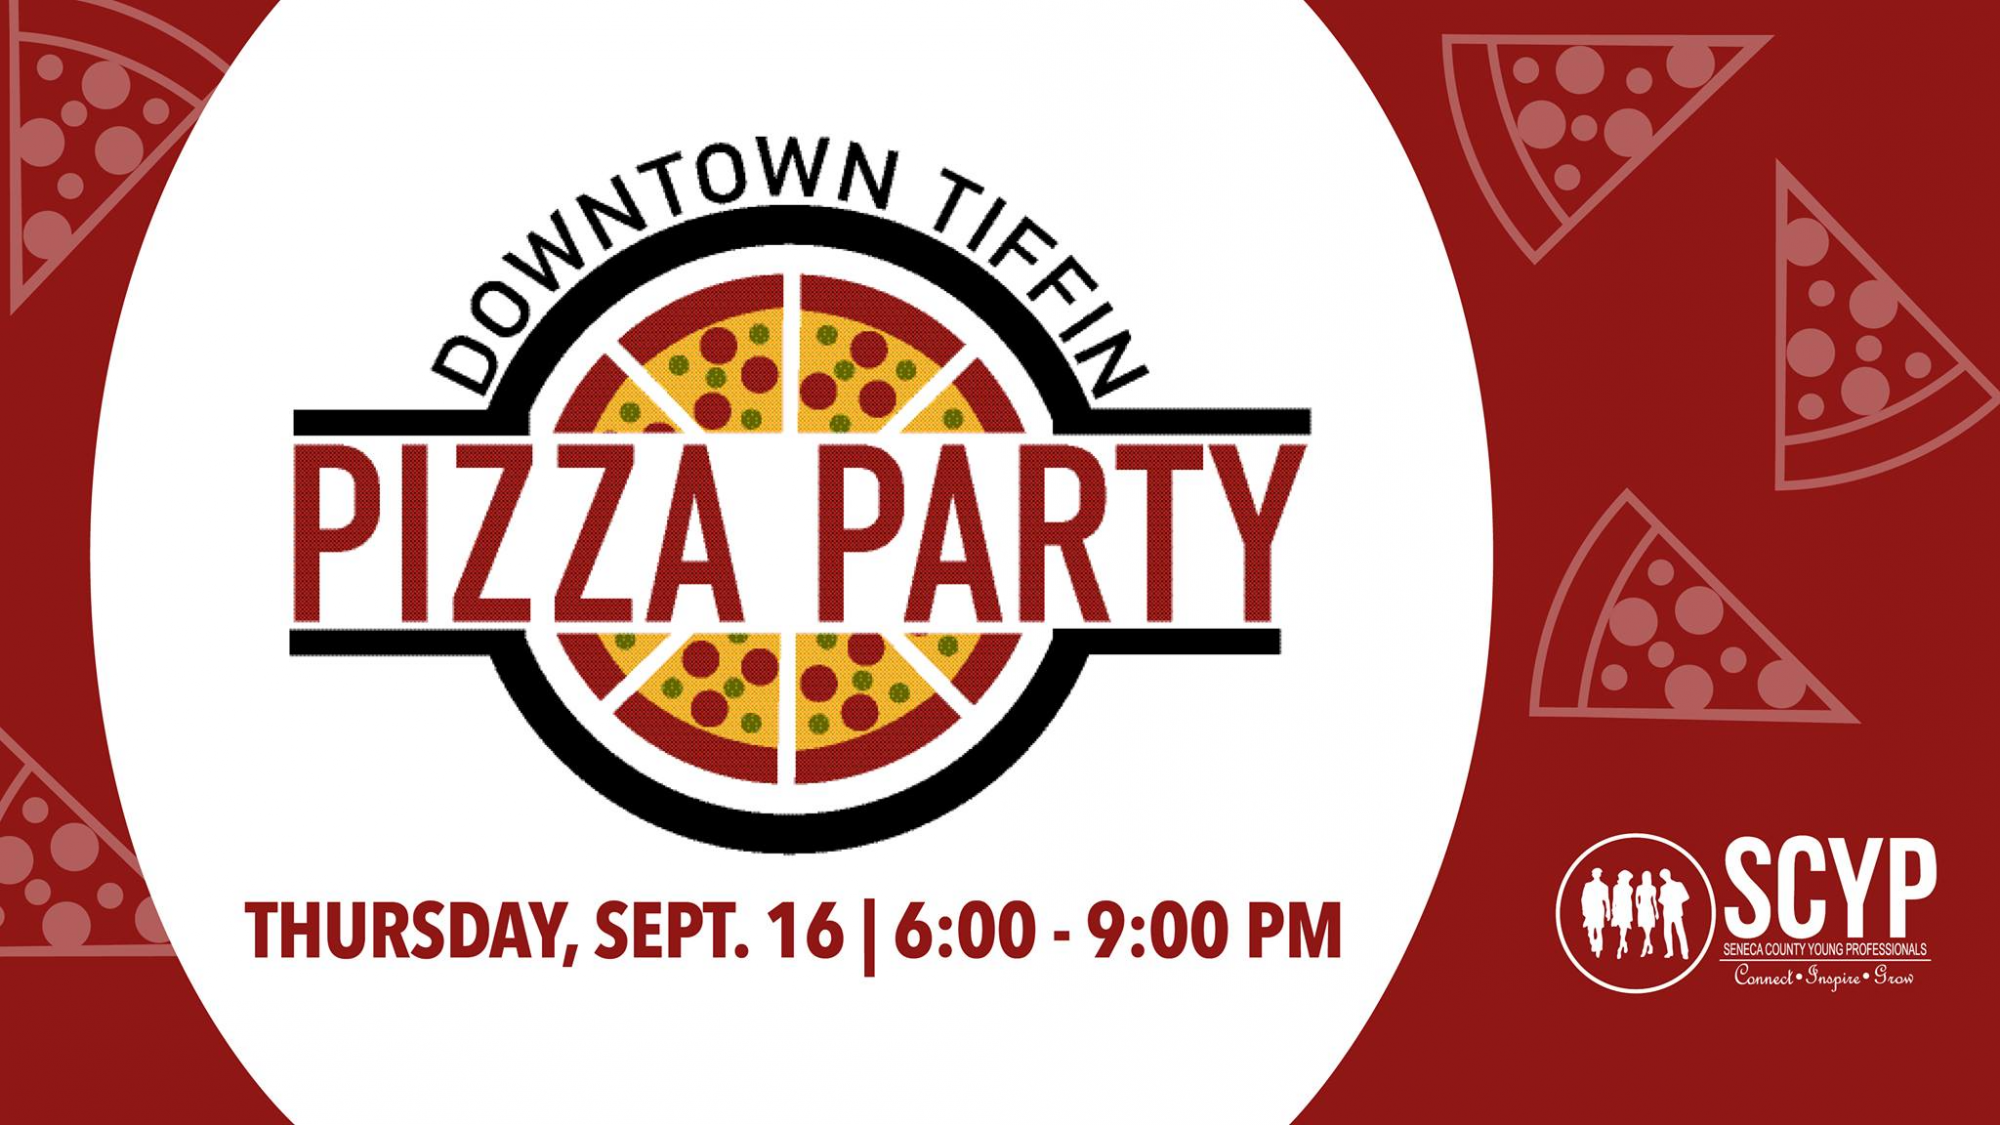 Third Thursday: Downtown Tiffin Pizza Party!